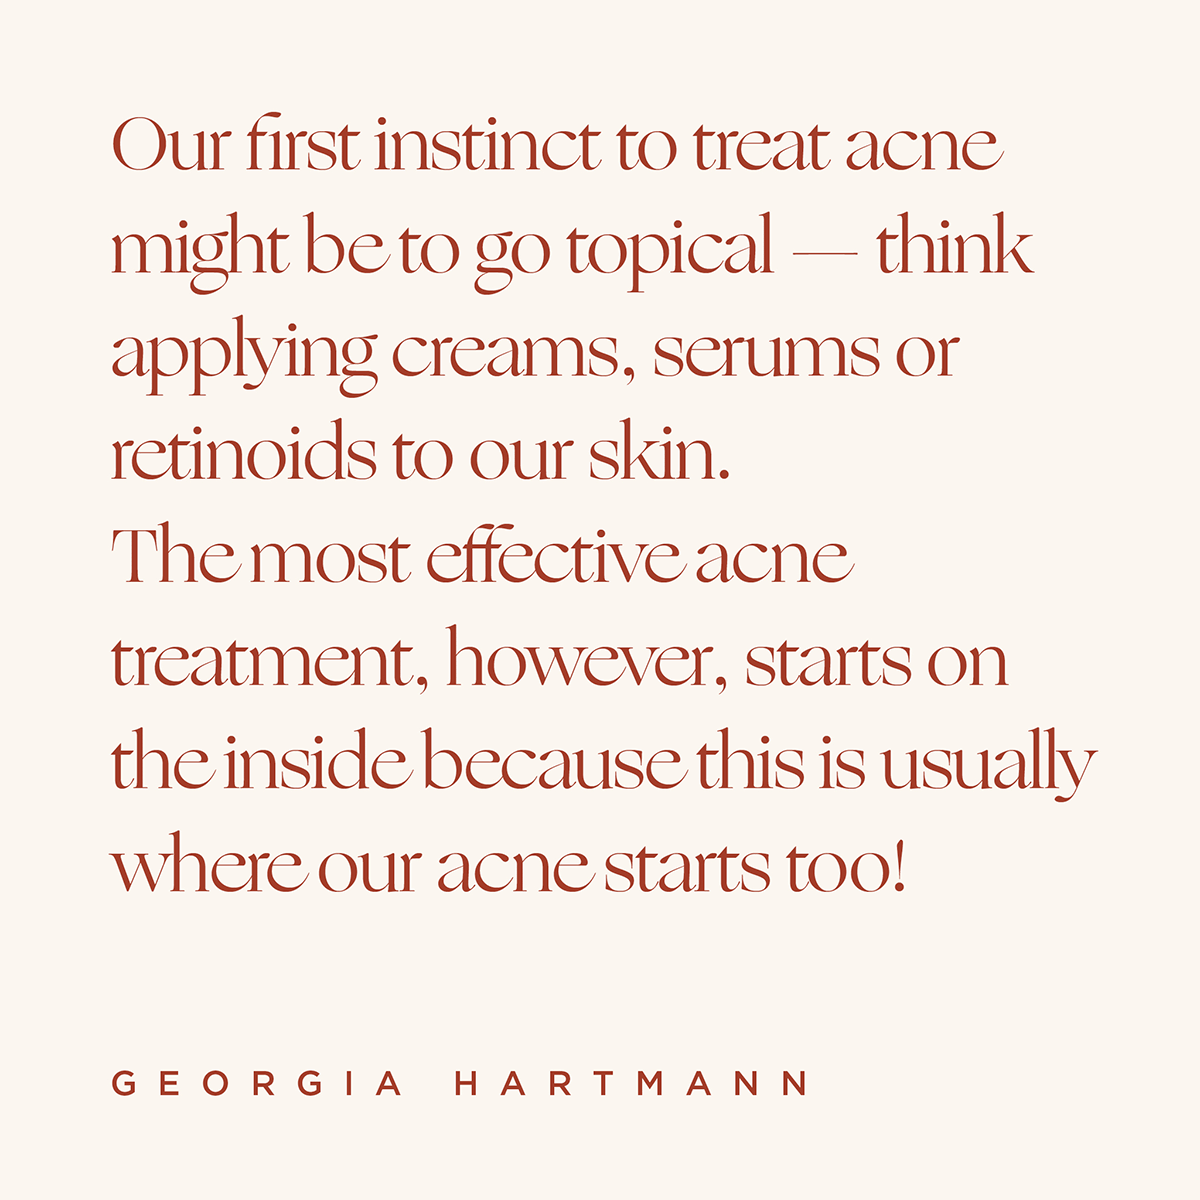 Quote: Our first instinct to treat acne might be to go topical - think applying creams, serums or retinoids to our skin. The most effective acne treatment, however, starts on the inside because this is usually where our acne starts too! -Georgia Hartmann